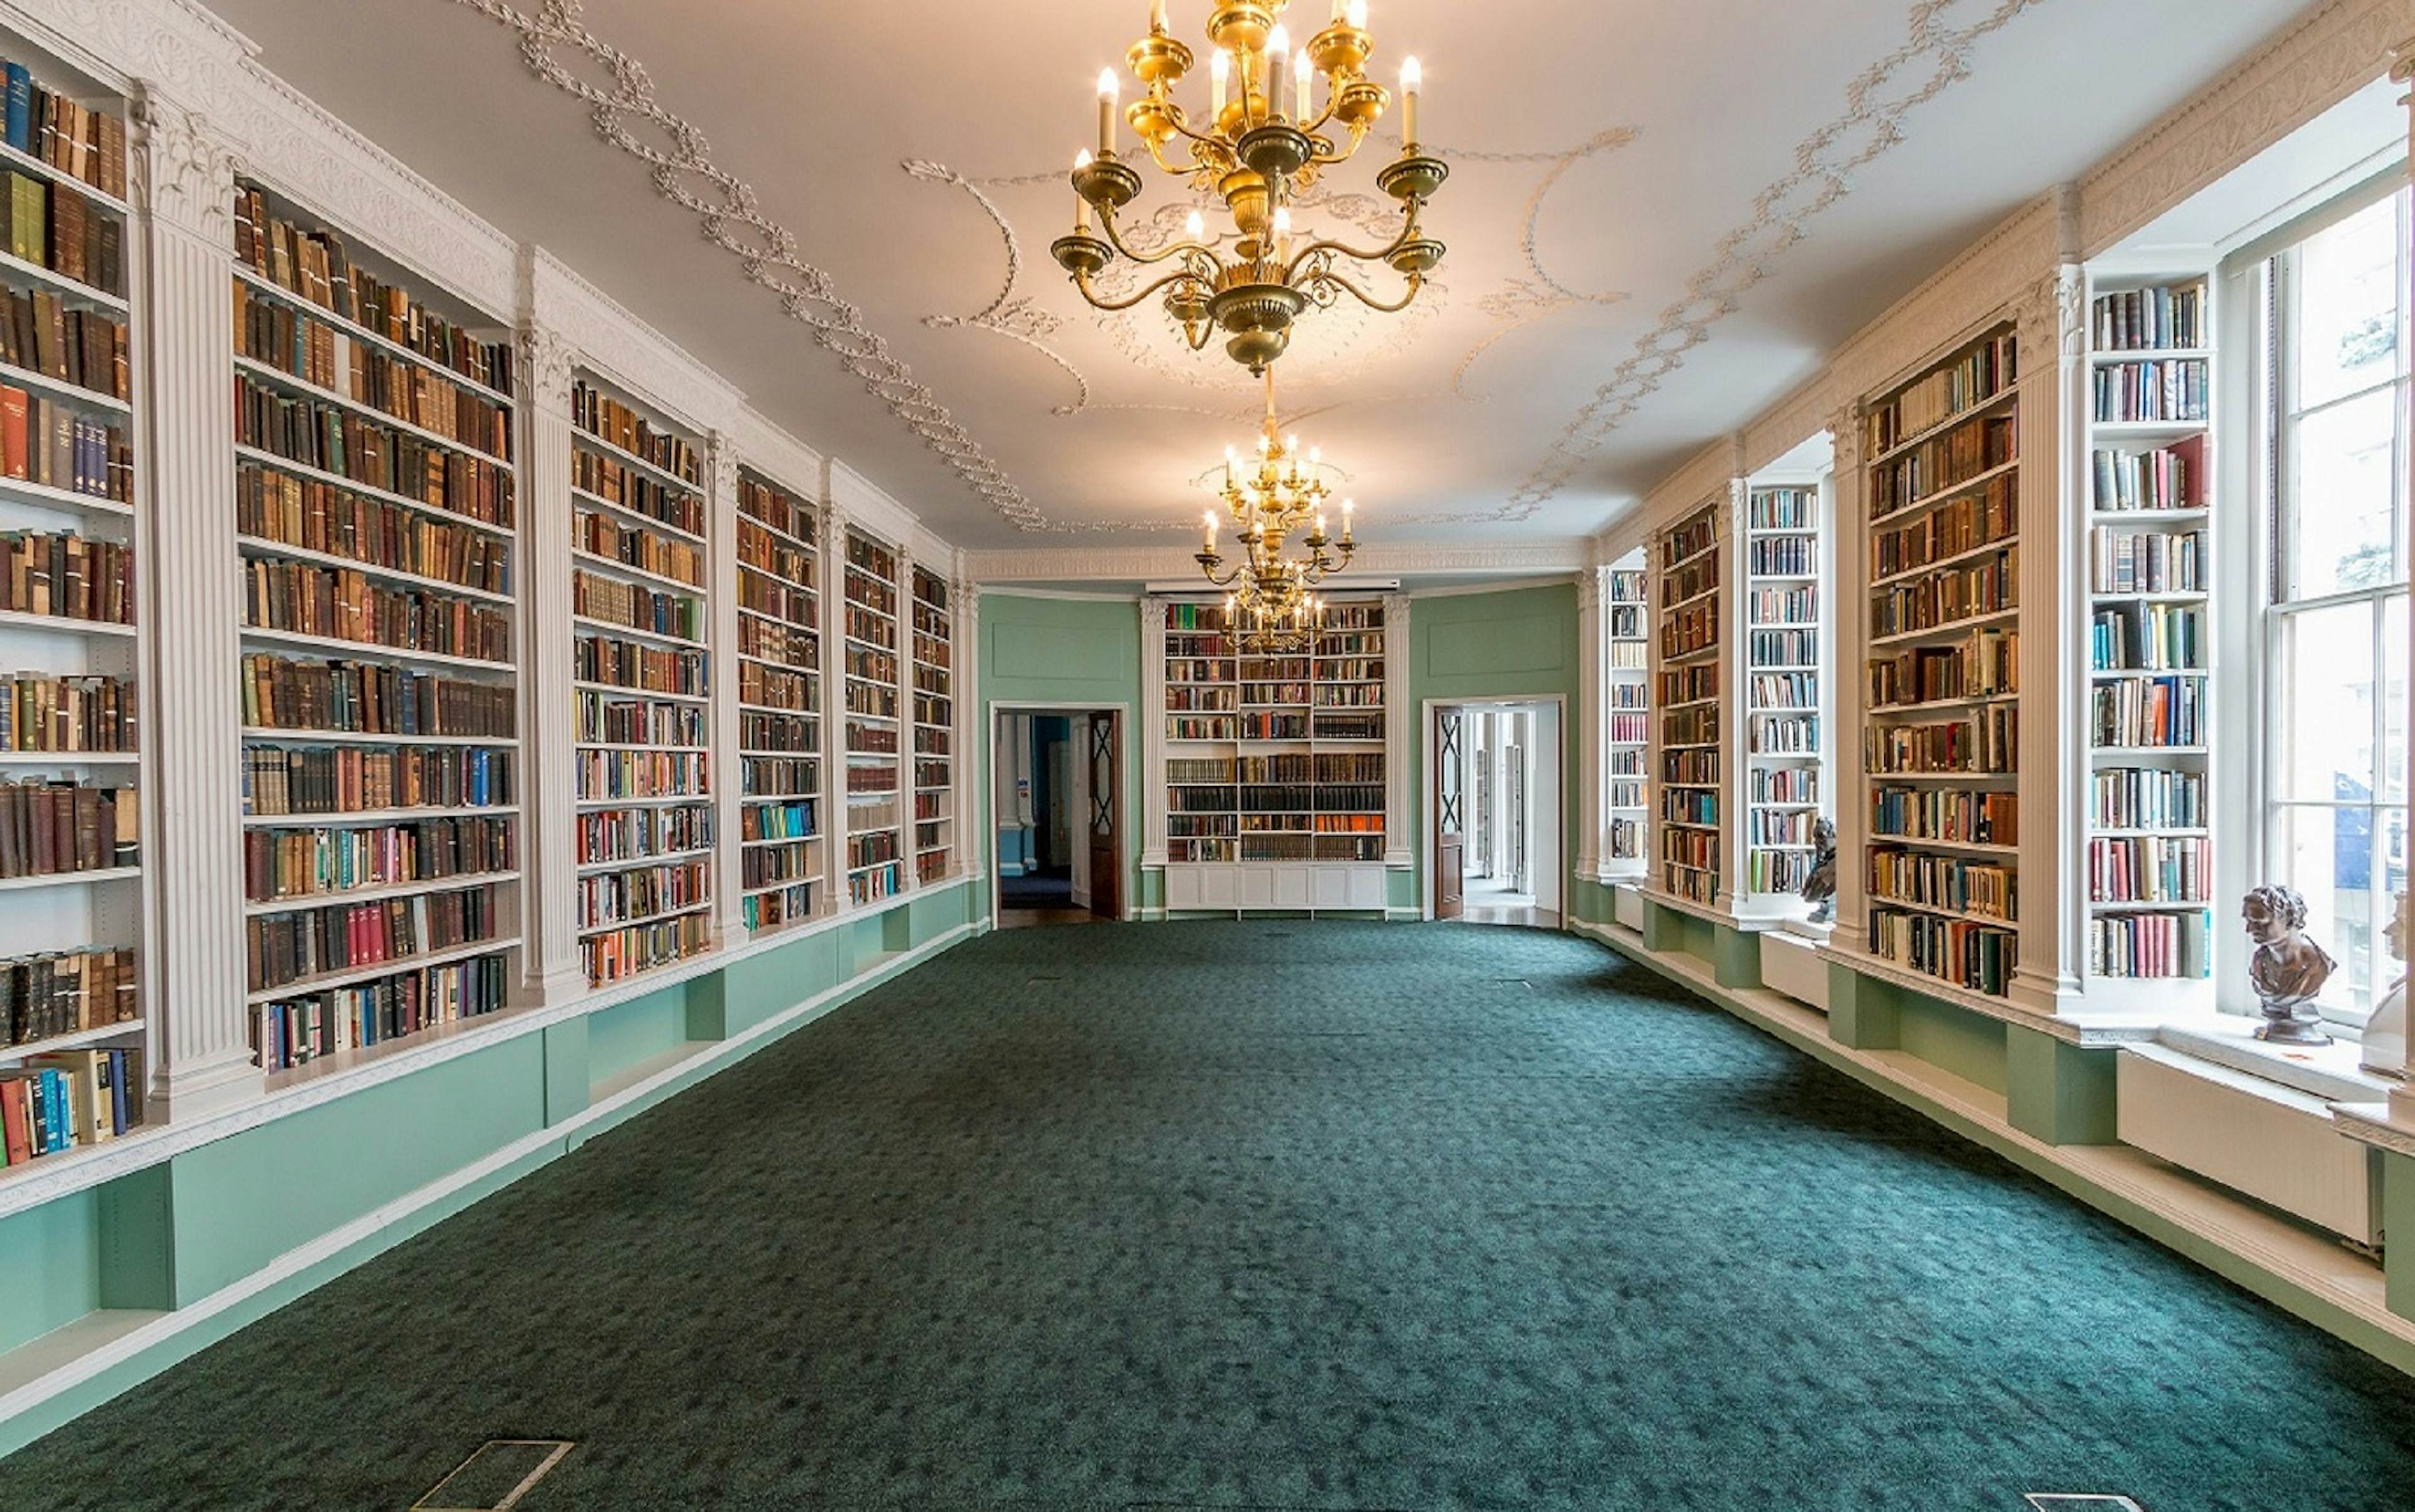 Royal Institution Venue - The Library image 1